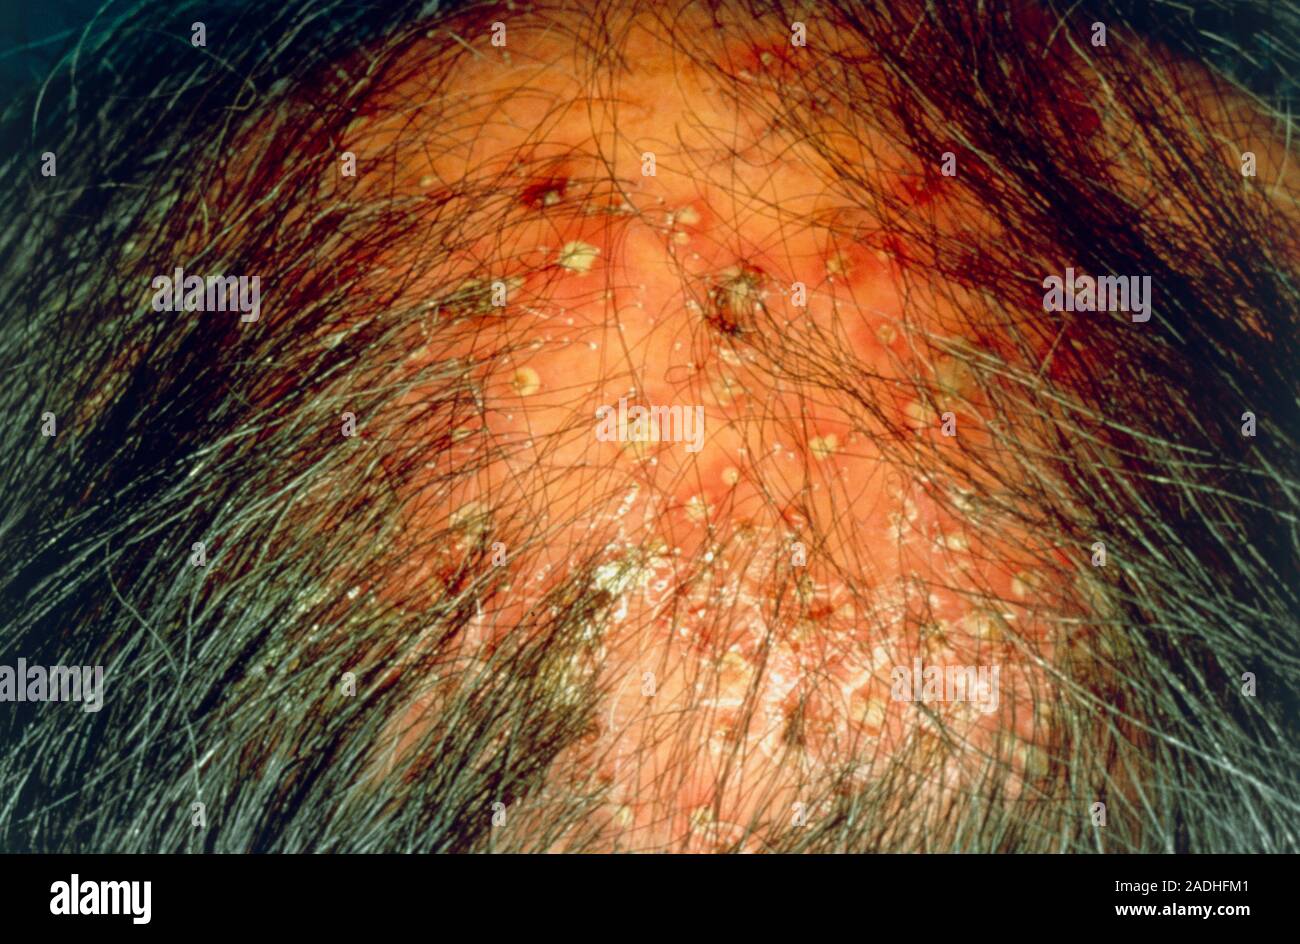 Example Of A Man Suffering With Folliculitis A Superficial Infection